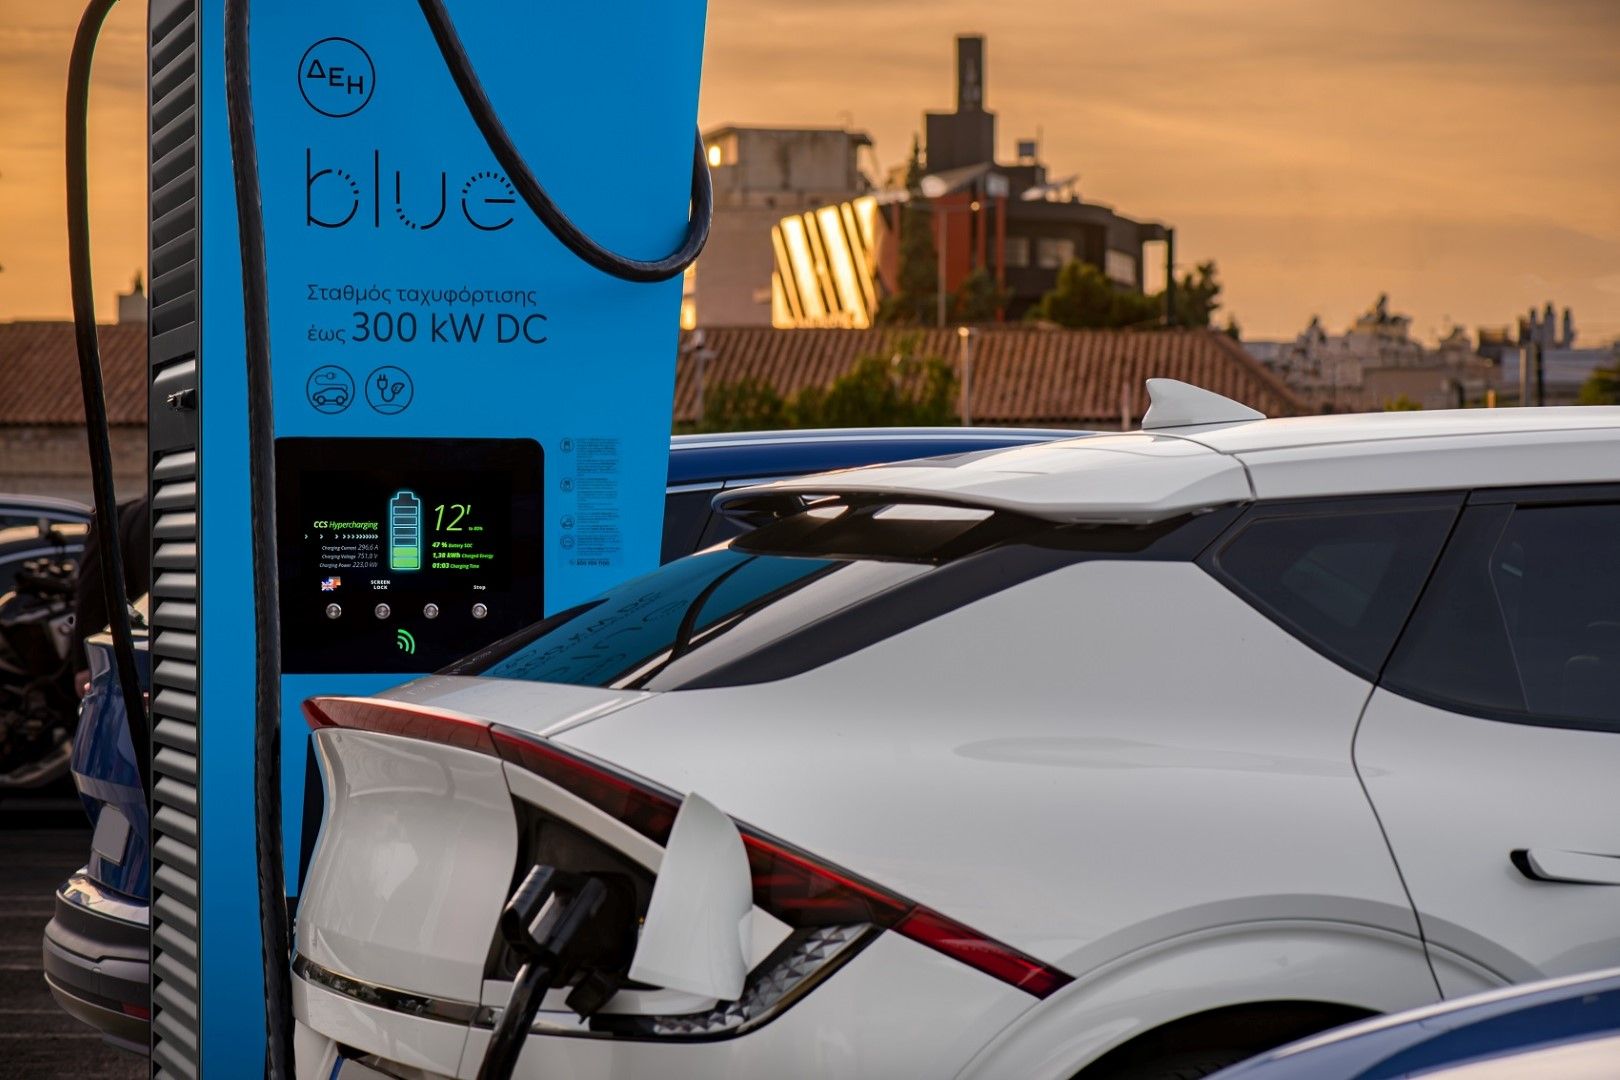 DEI-DEH-Blue-300kW-Top-Parks-CarsElectric-5